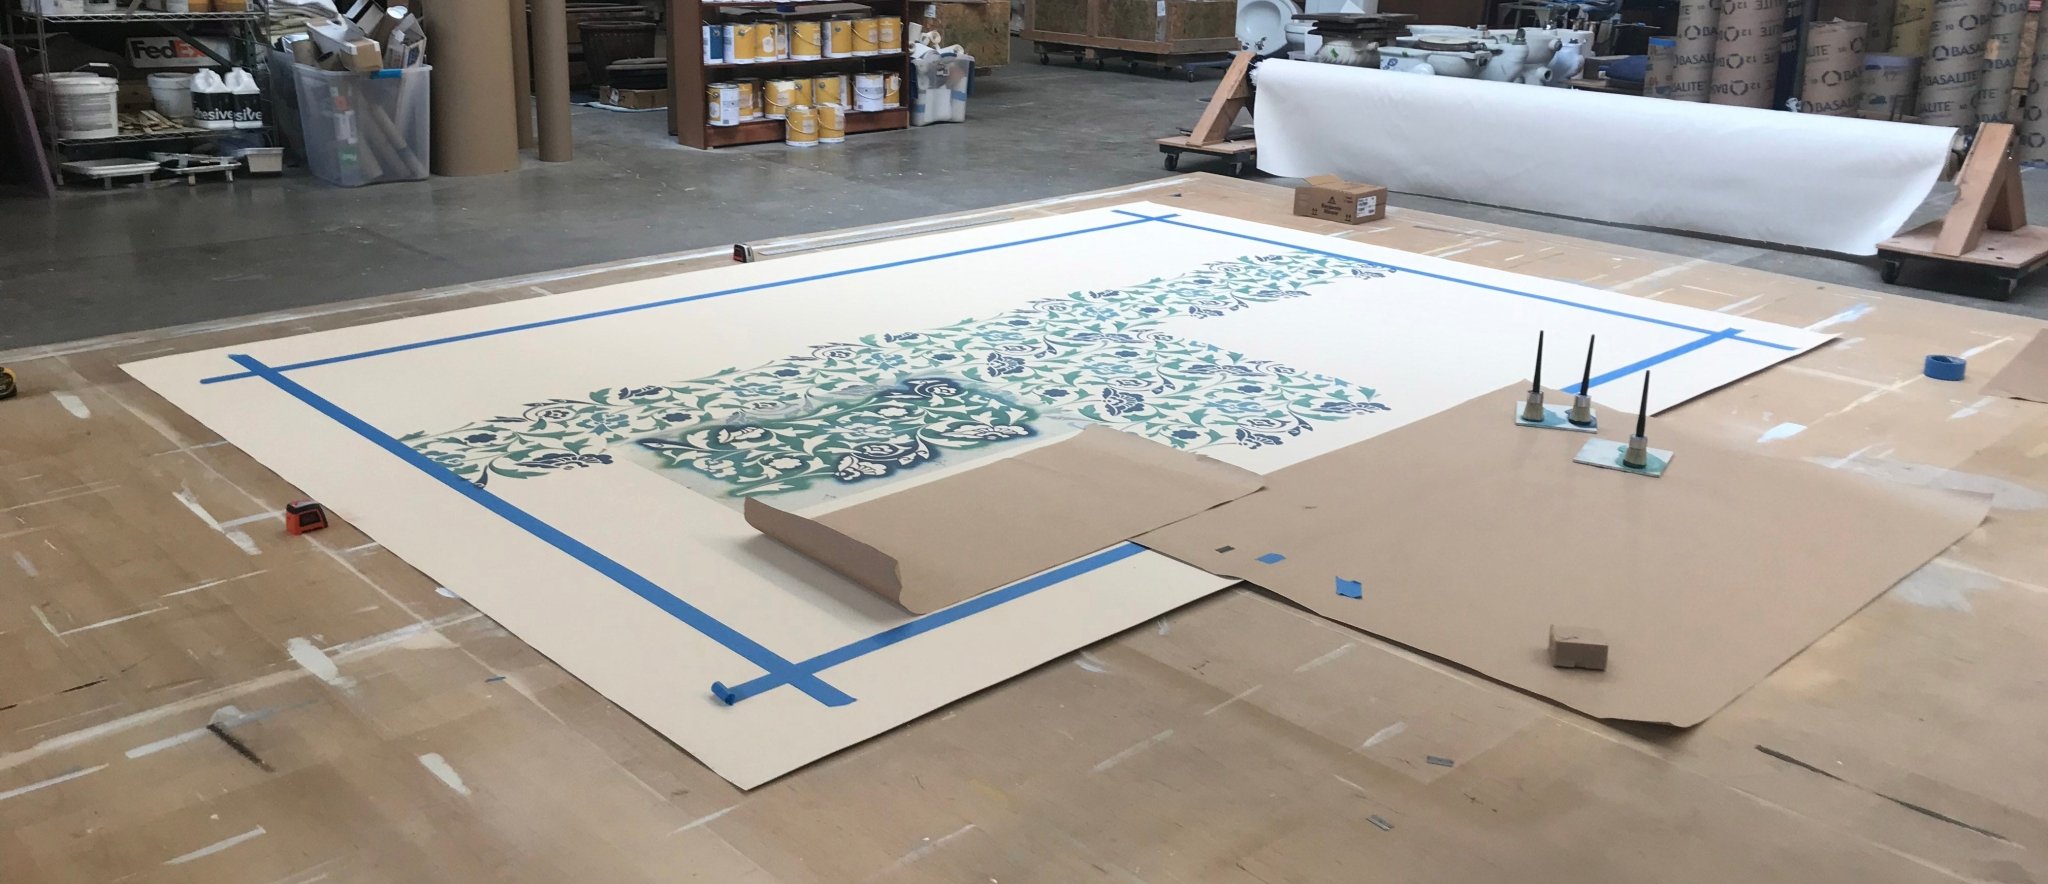 A second production image of this floorcloth showing the stencil progression done in a manner to ensure that the pattern remains square to the floorcloth.